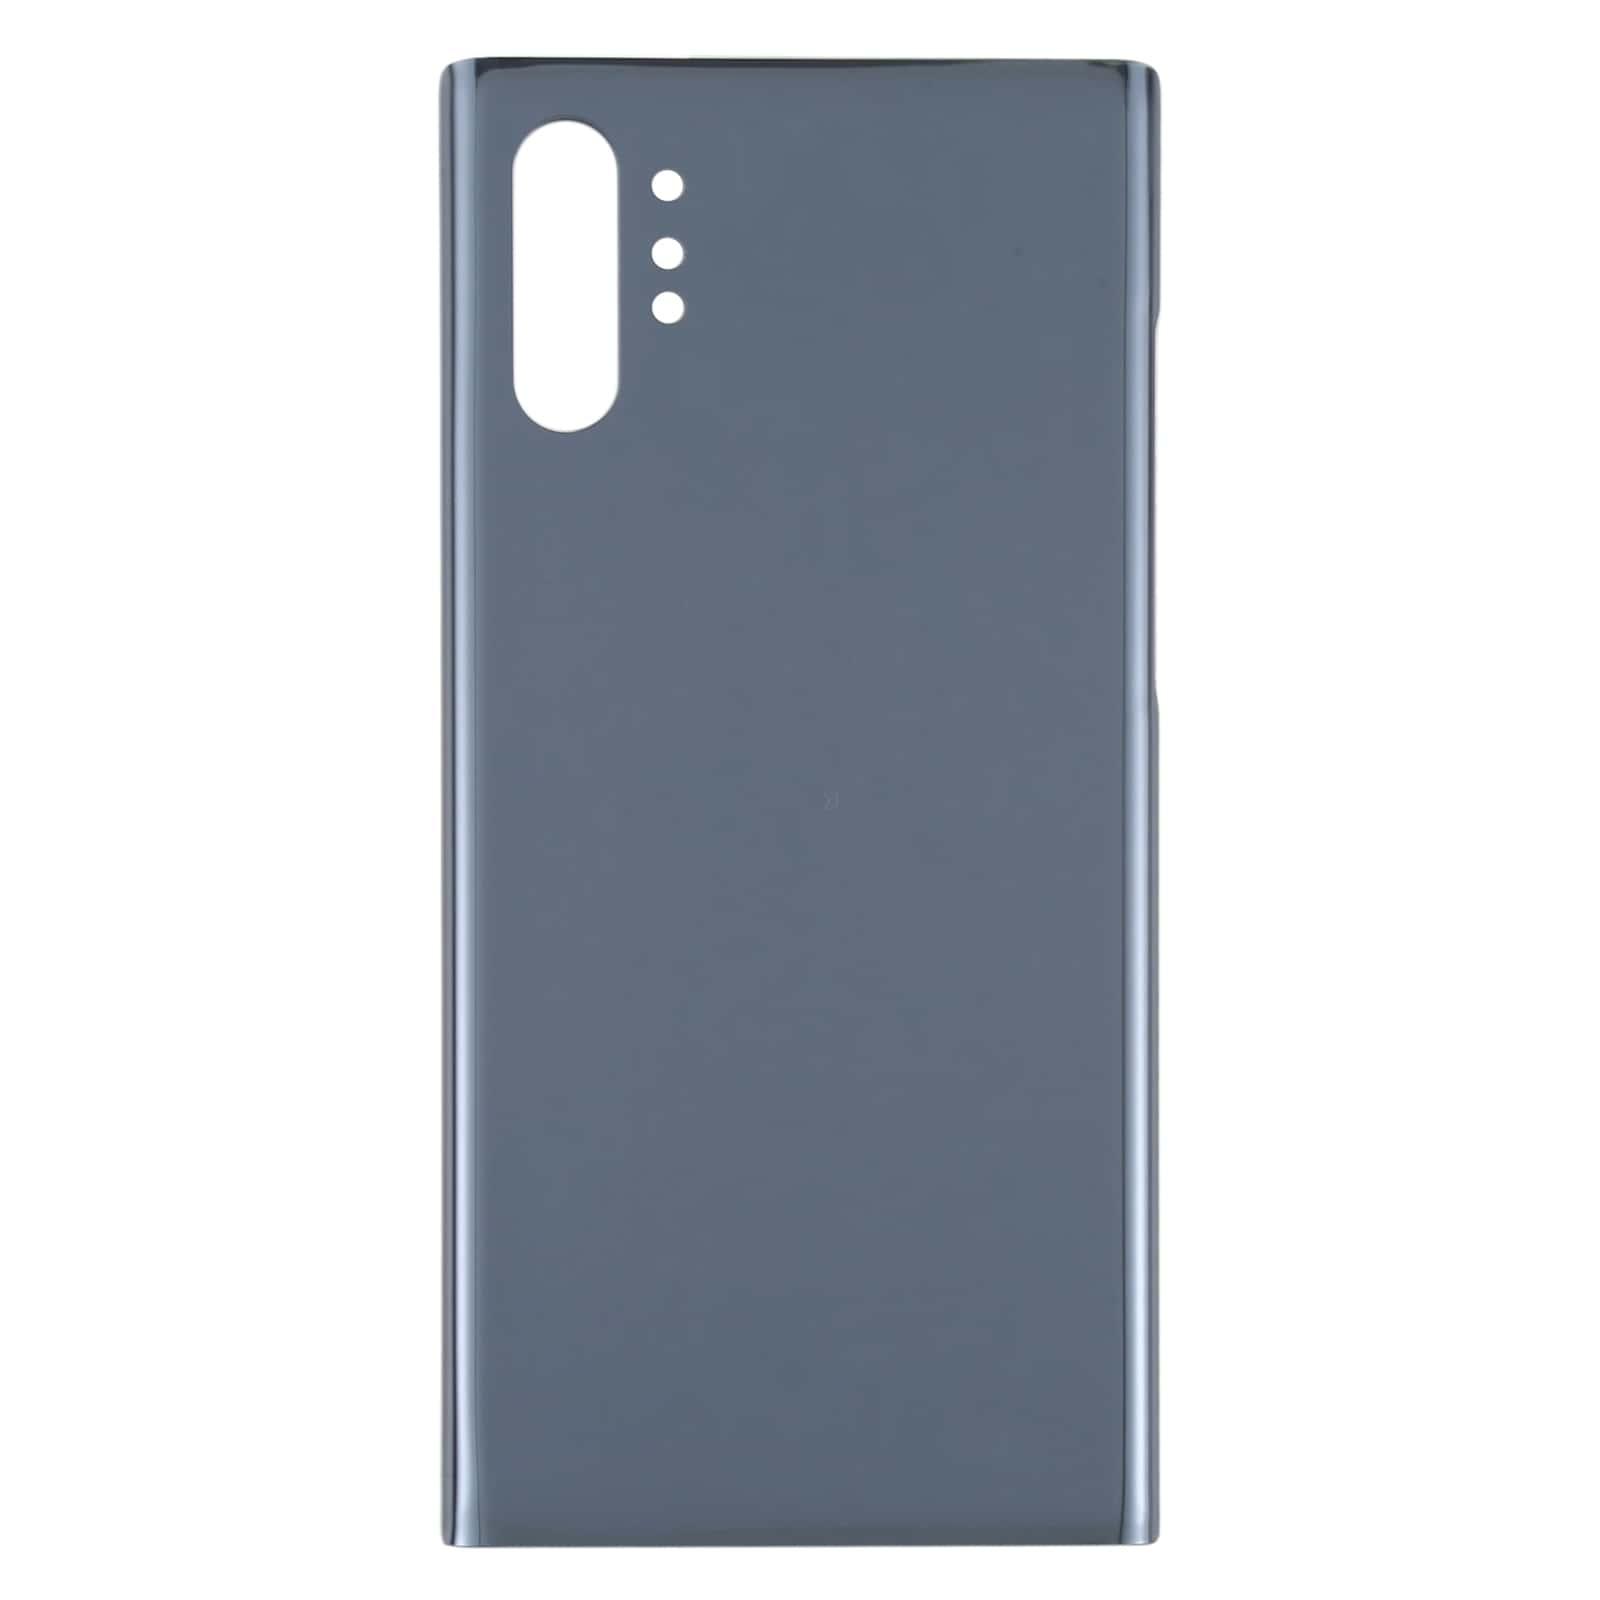 Back Glass Panel for  Samsung Galaxy Note10 Black